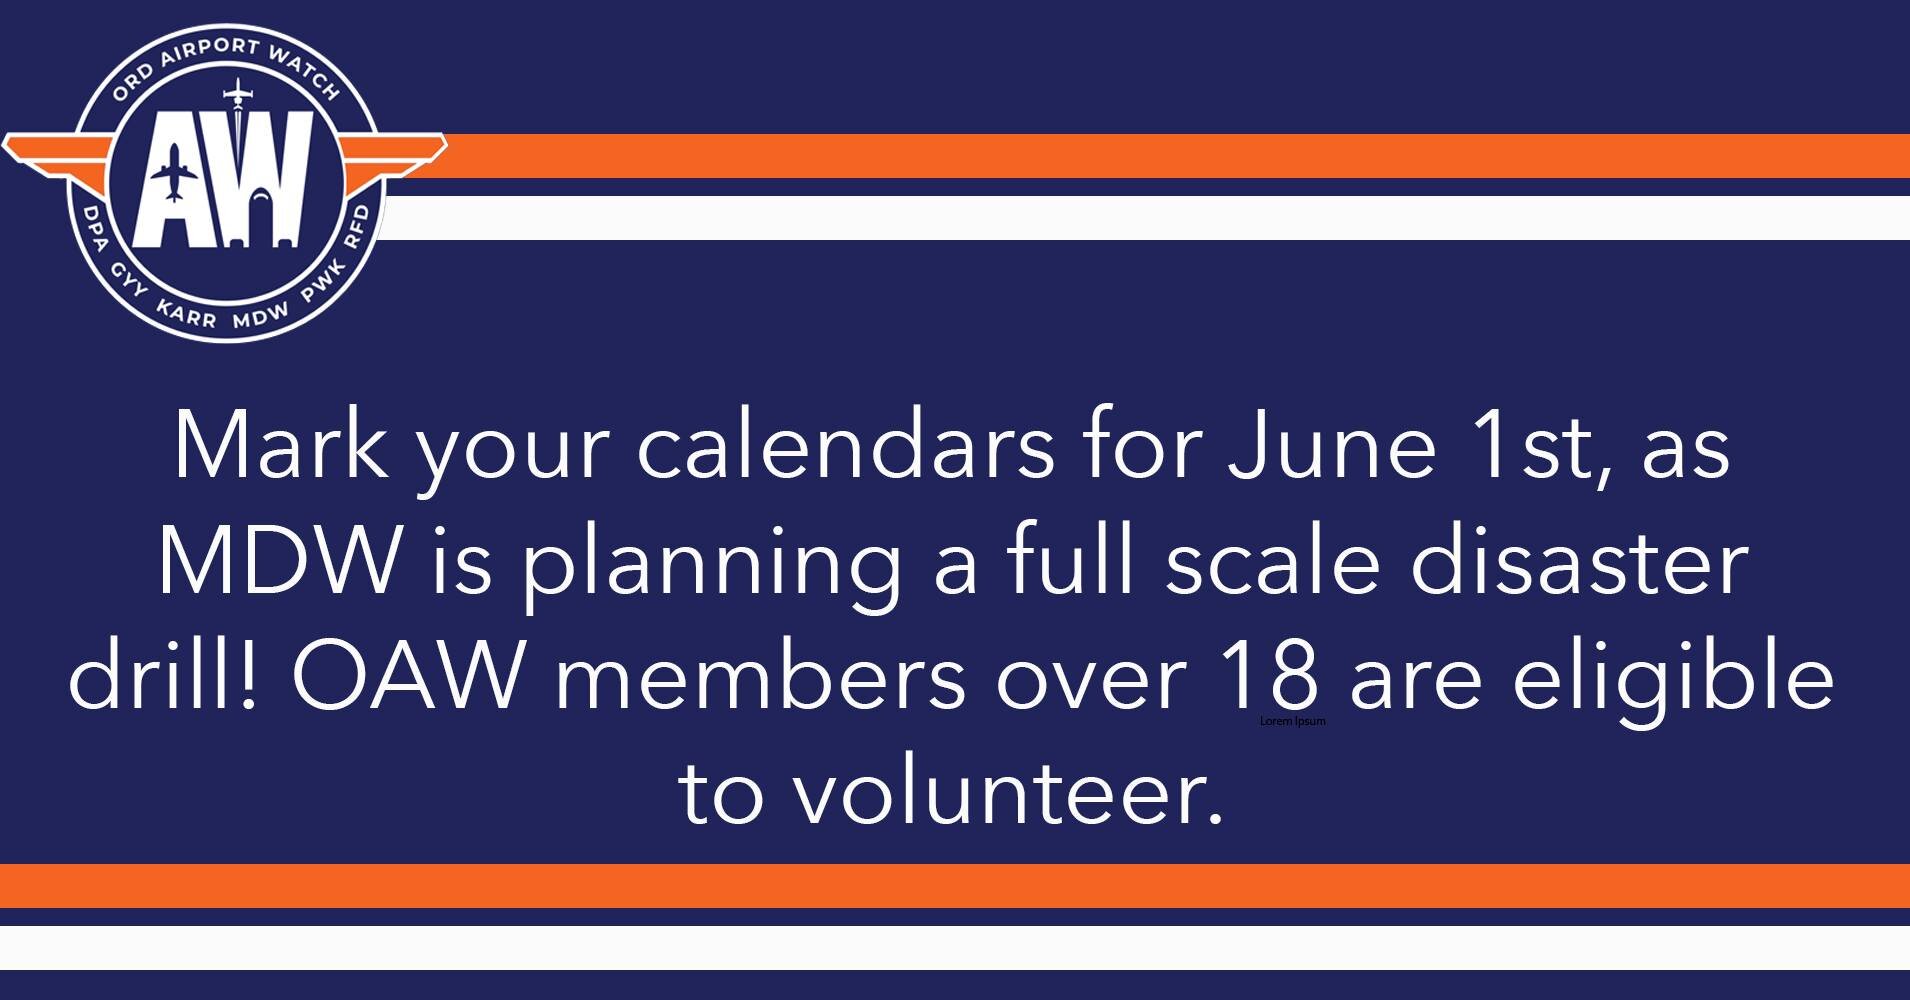 Mark your calendars for June 1st, 2024!

Every few years, Chicagoland airports perform a 'full scale exercise' to test and practice emergency procedures and response in a disaster scenario. A large number of volunteers are needed to act as the 'victi